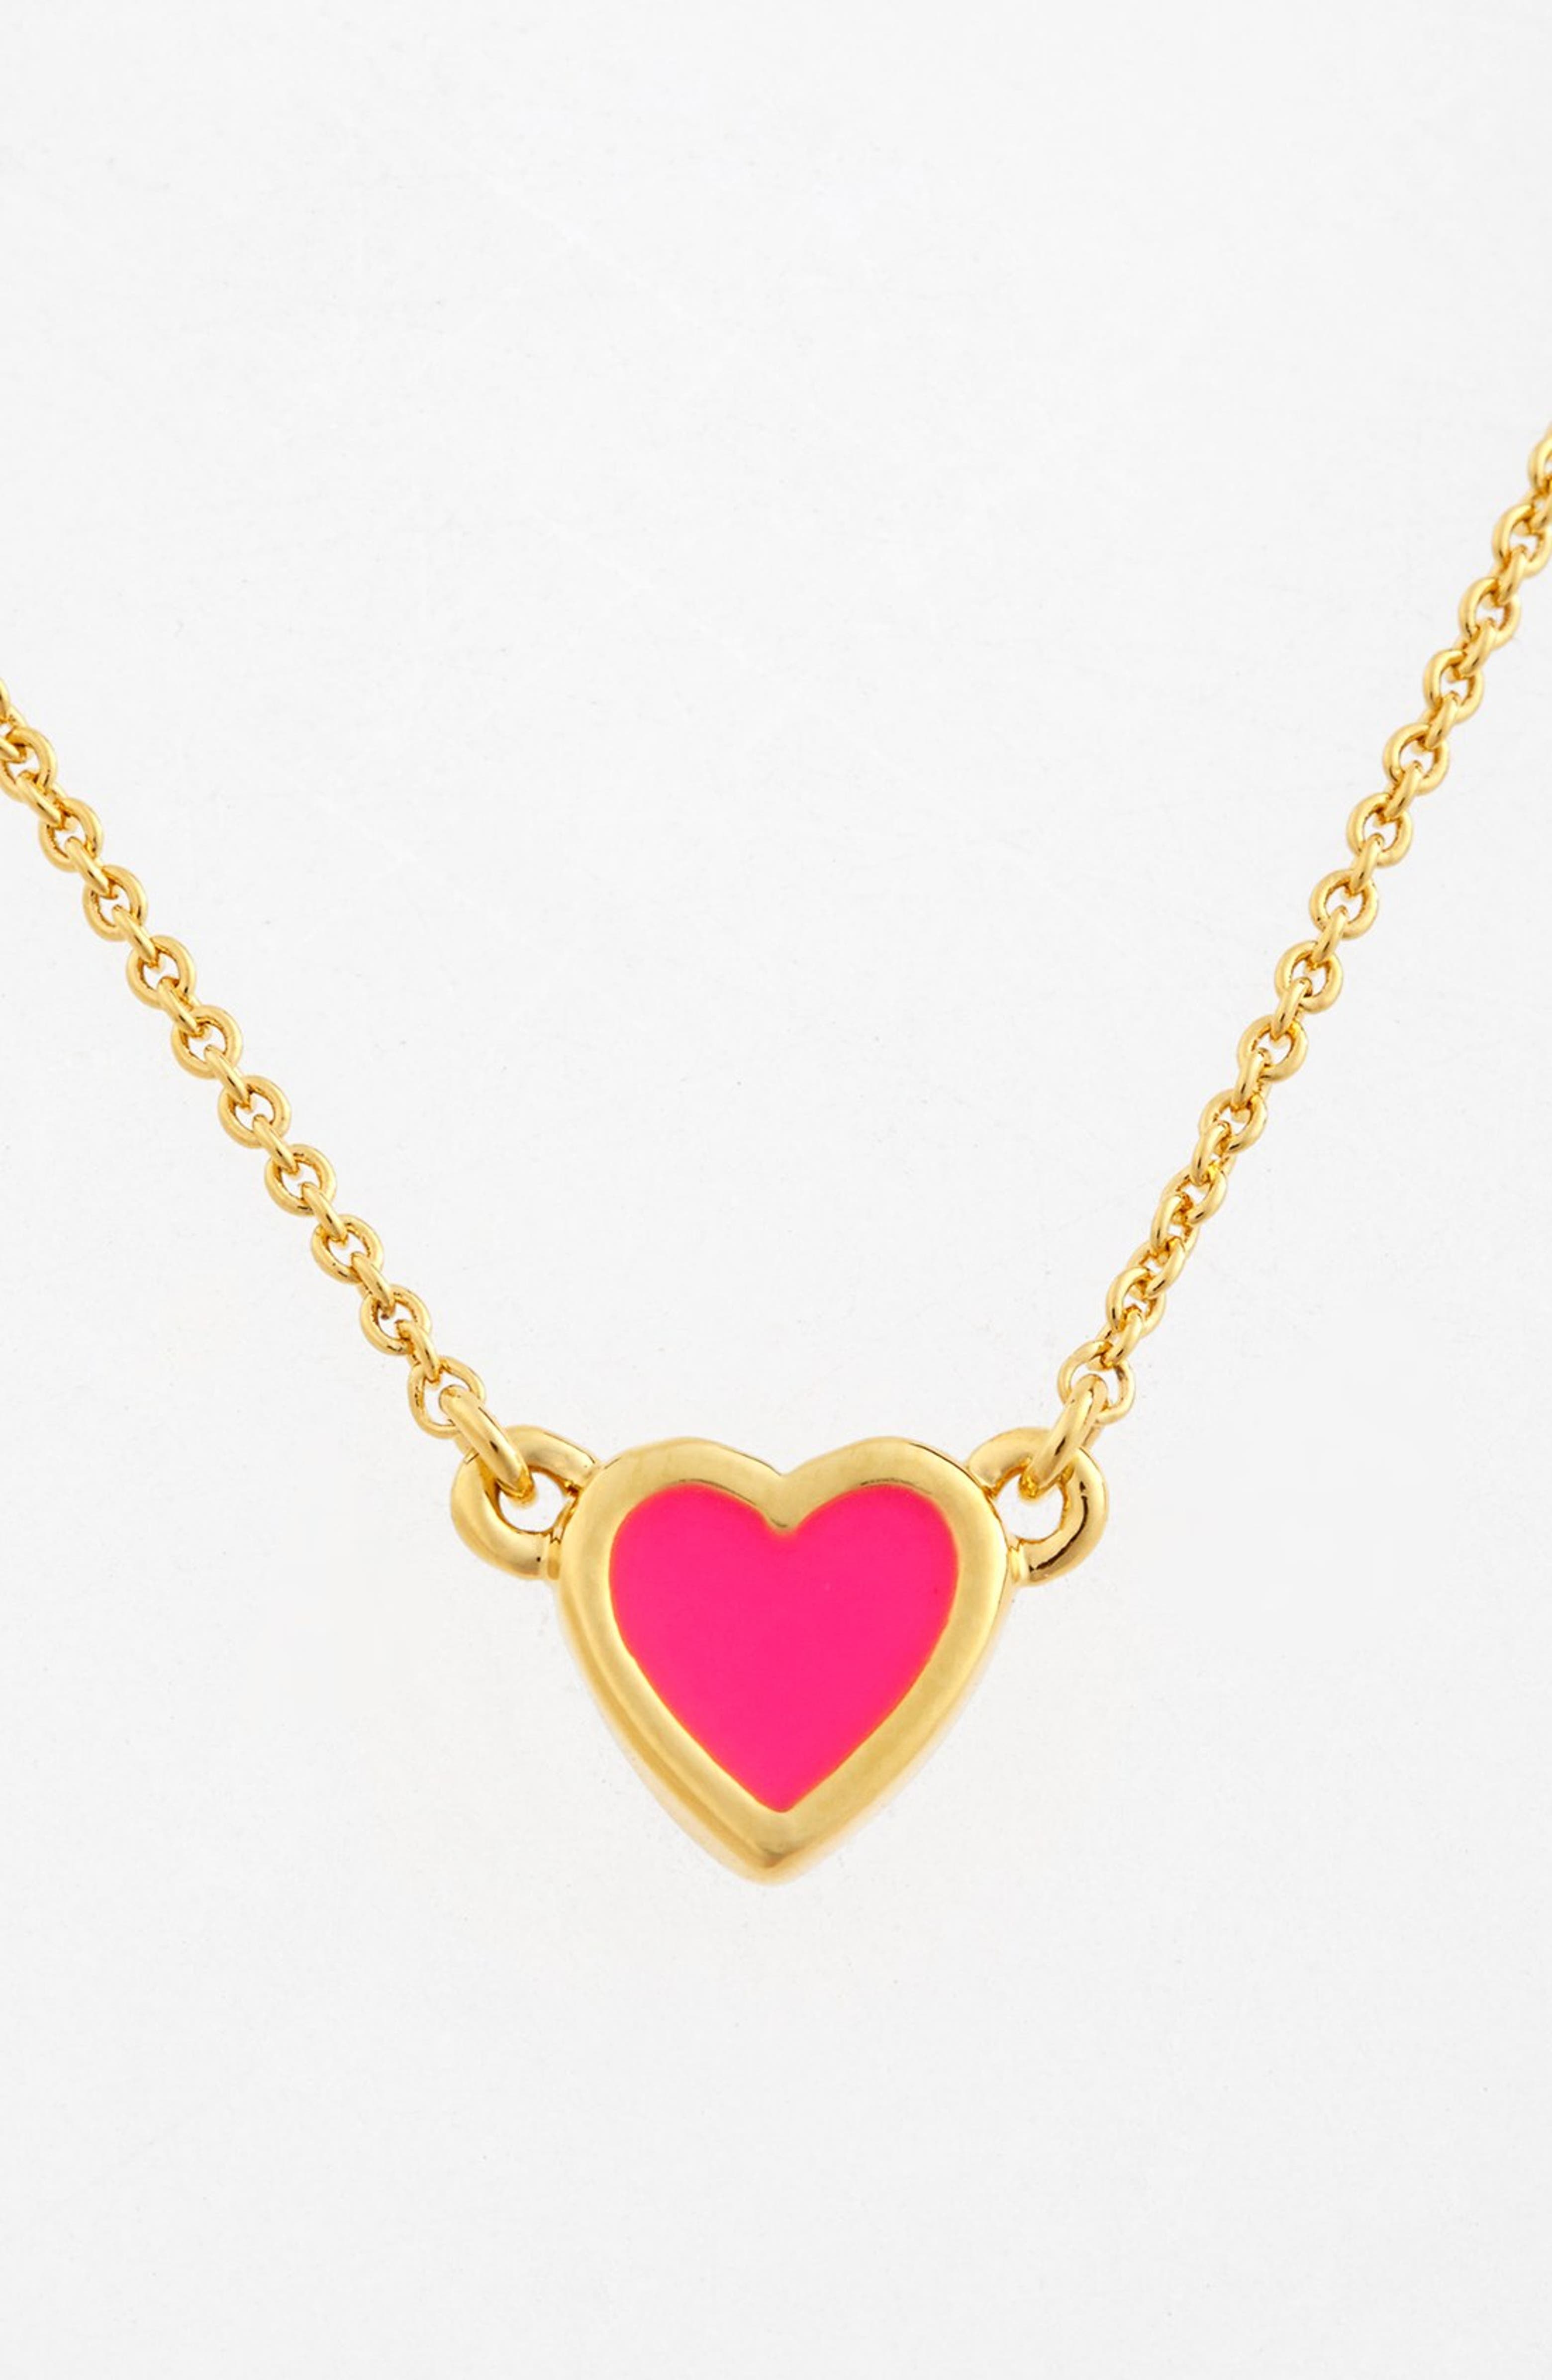 kate spade new york 'be mine' heart pendant necklace | Nordstrom